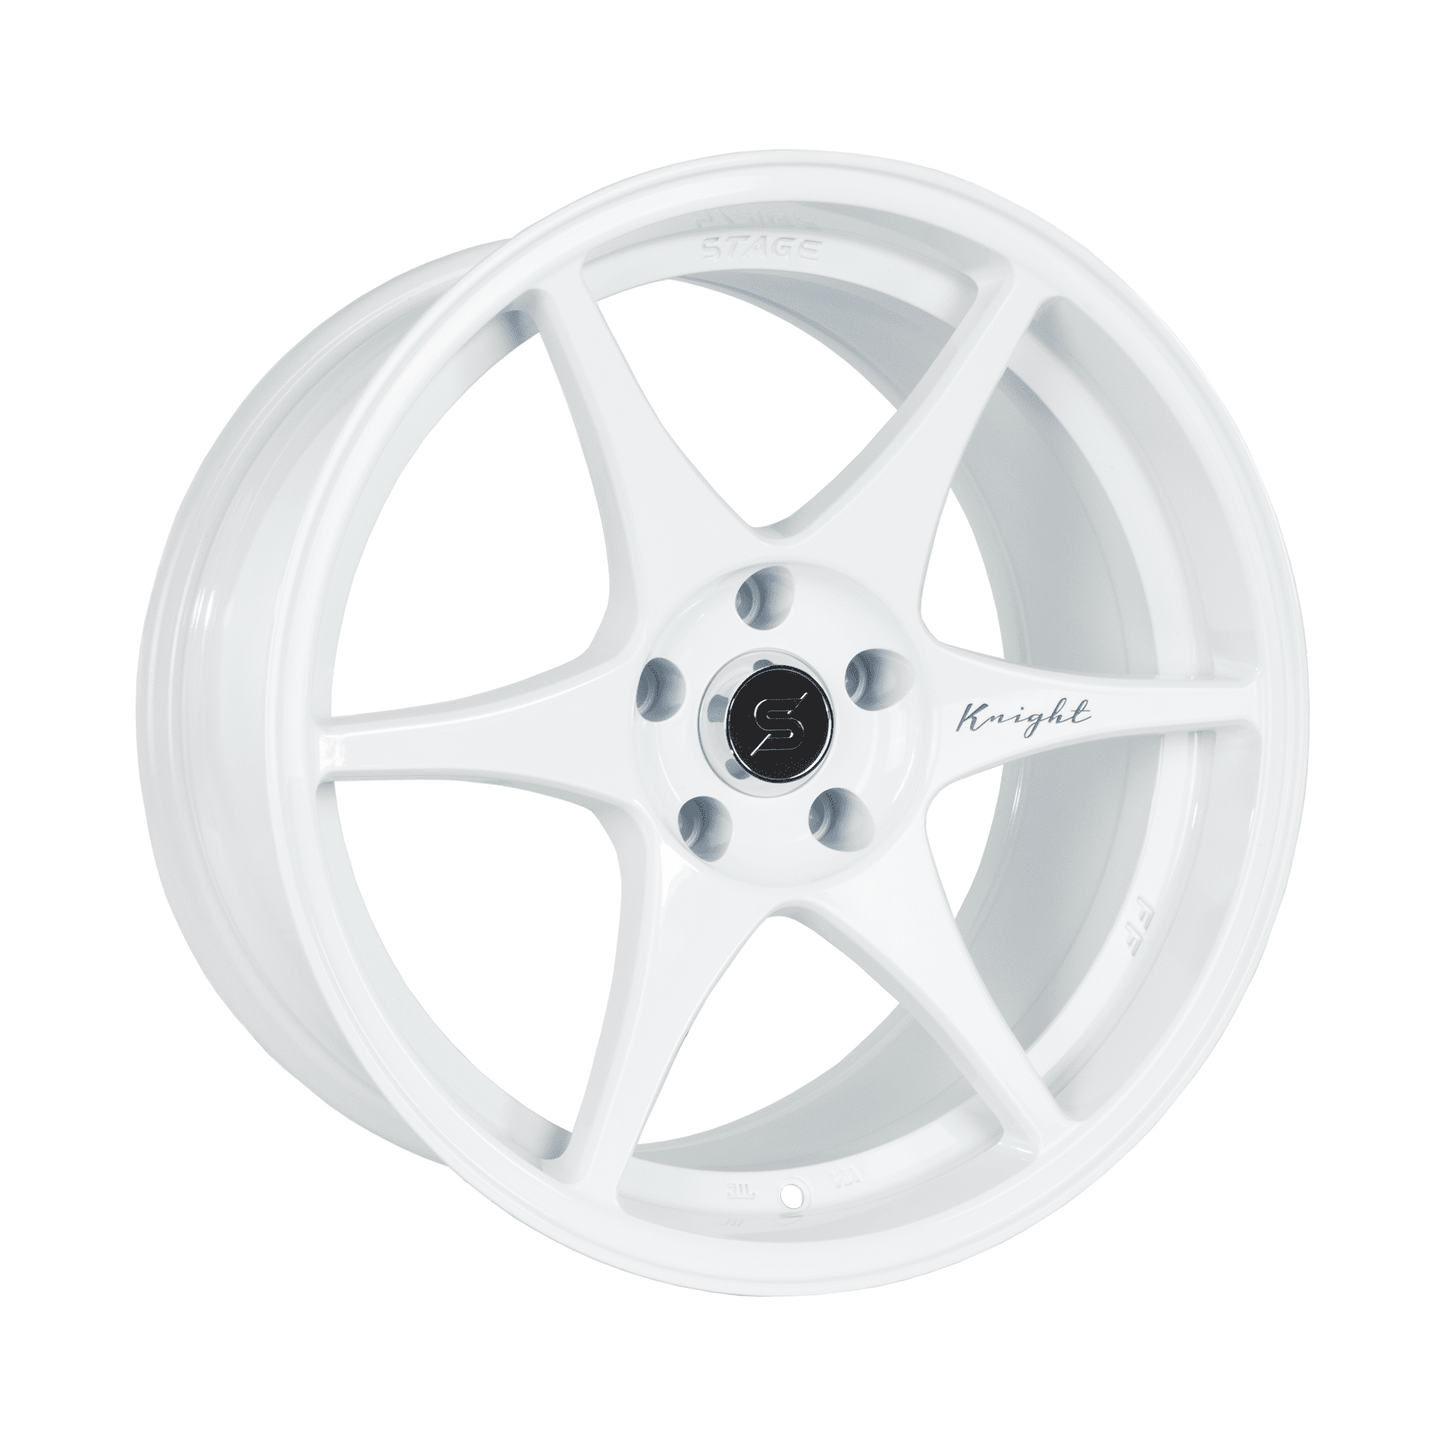 Stage Wheels Knight 18x9.5 +35mm 5x114.3 CB: 73.1 Color: White